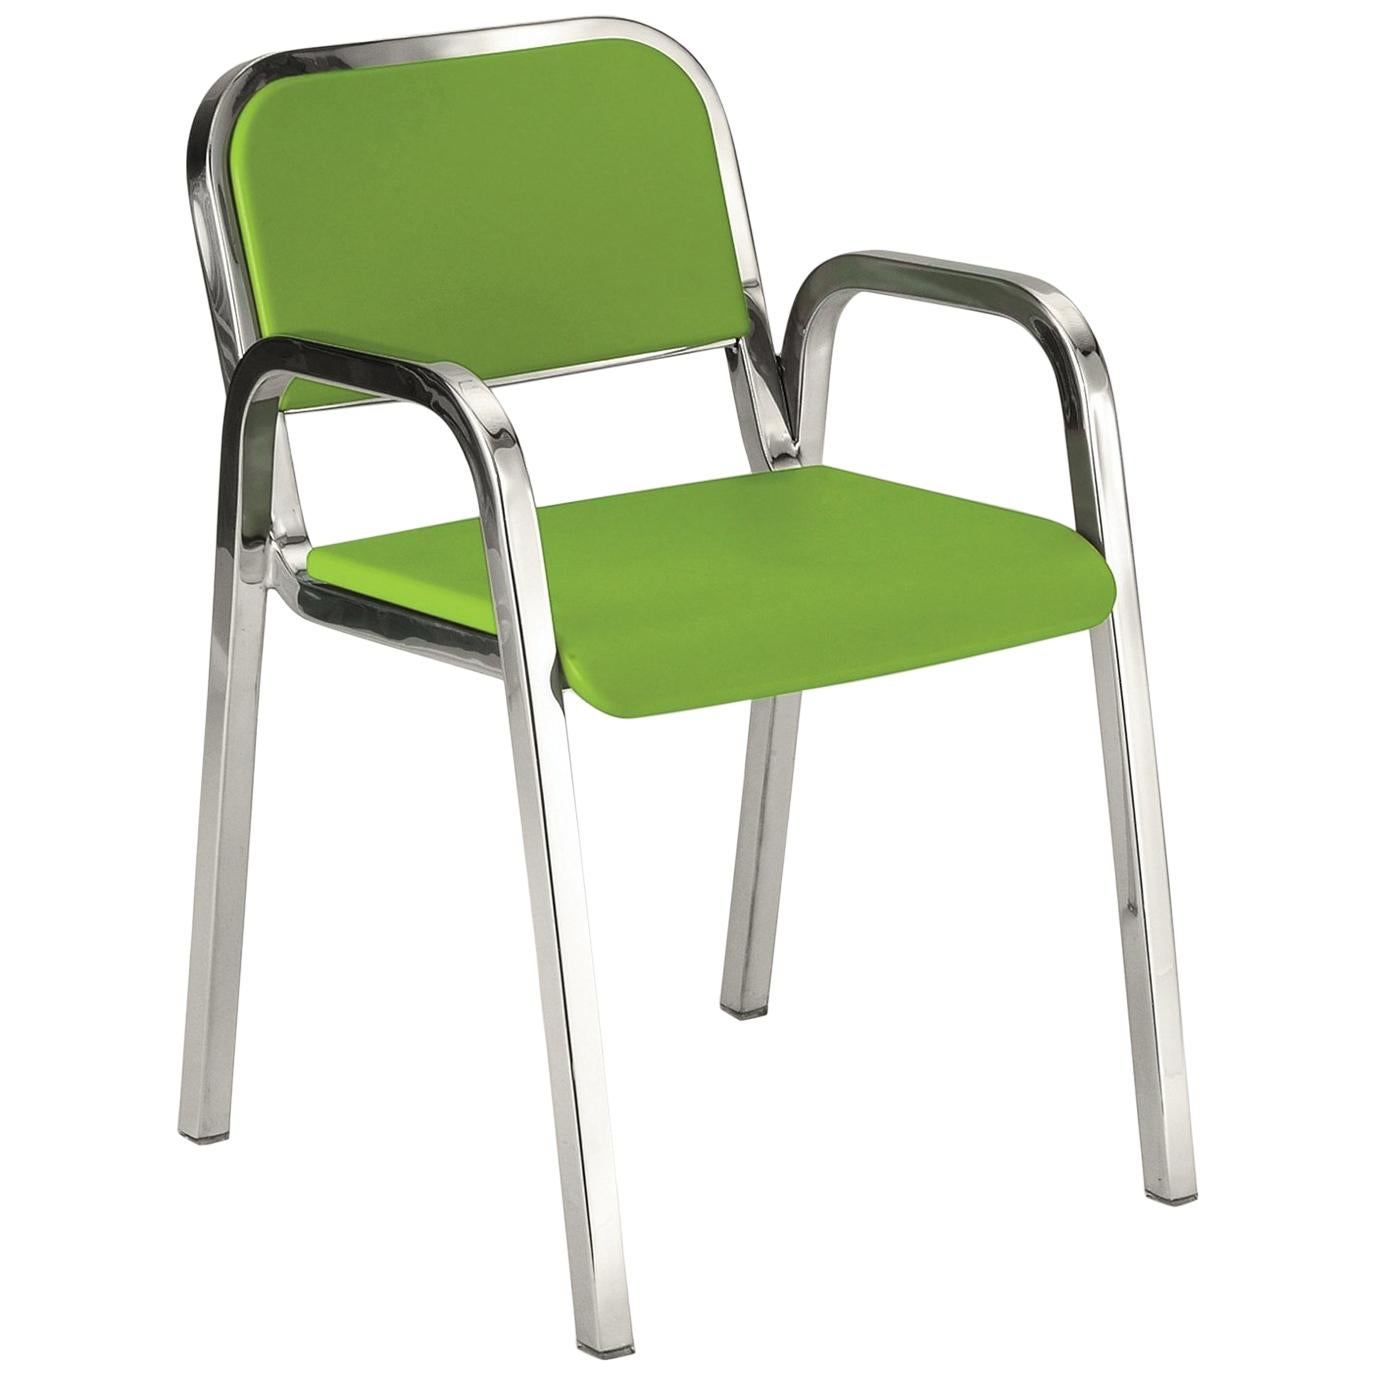 Emeco Nine-0 Armchair in Polished Aluminium and Green by Ettore Sottsass